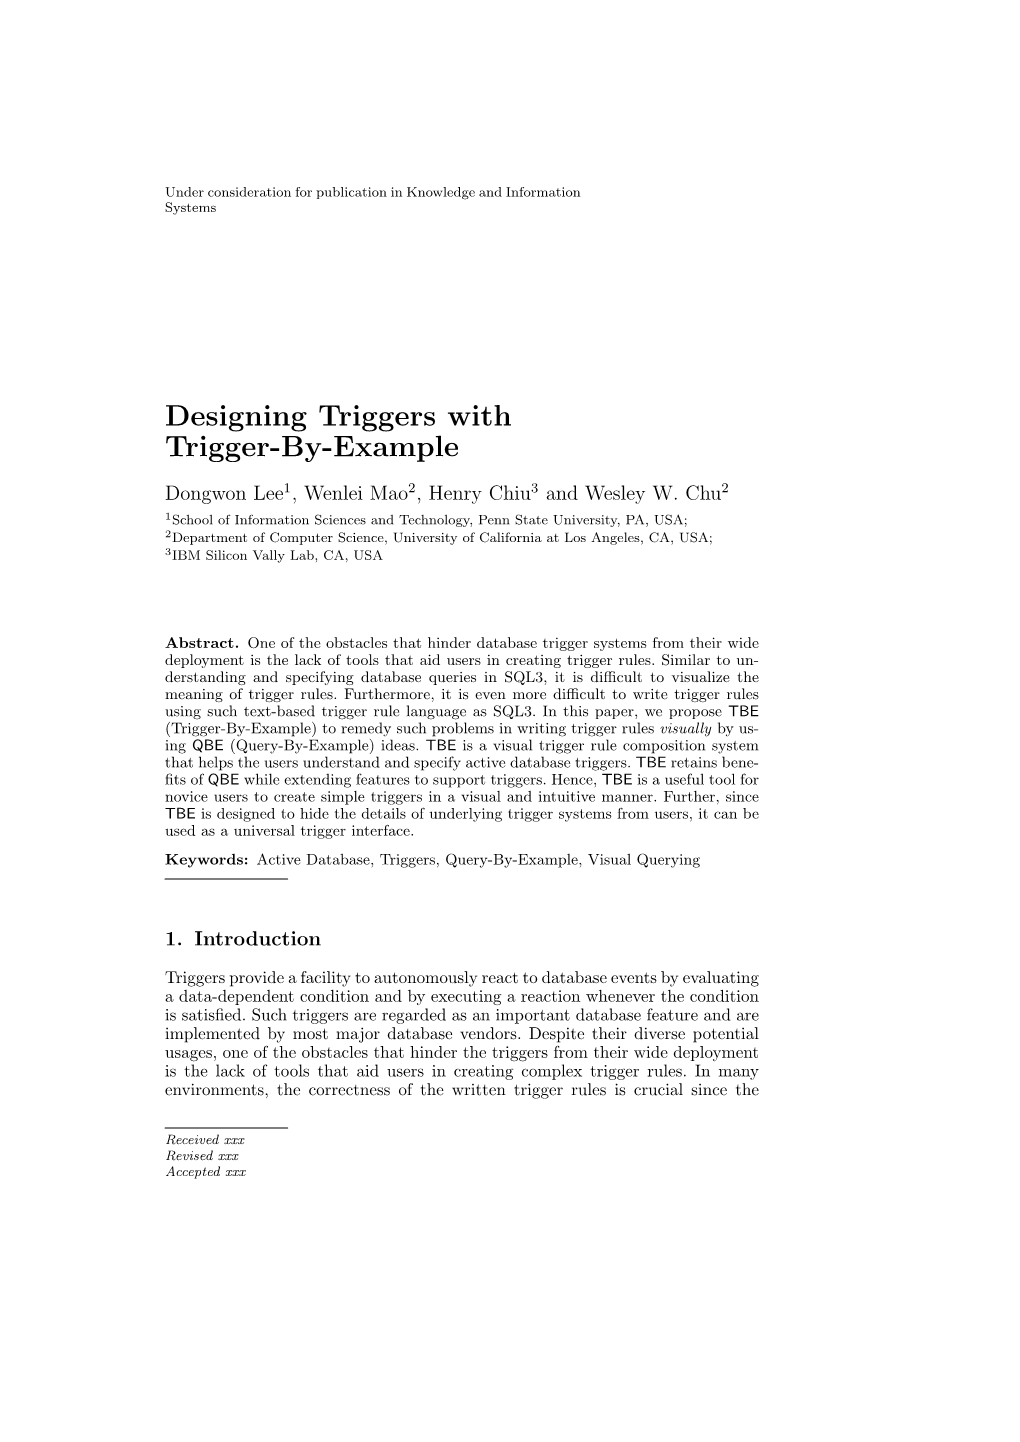 Designing Triggers with Trigger-By-Example